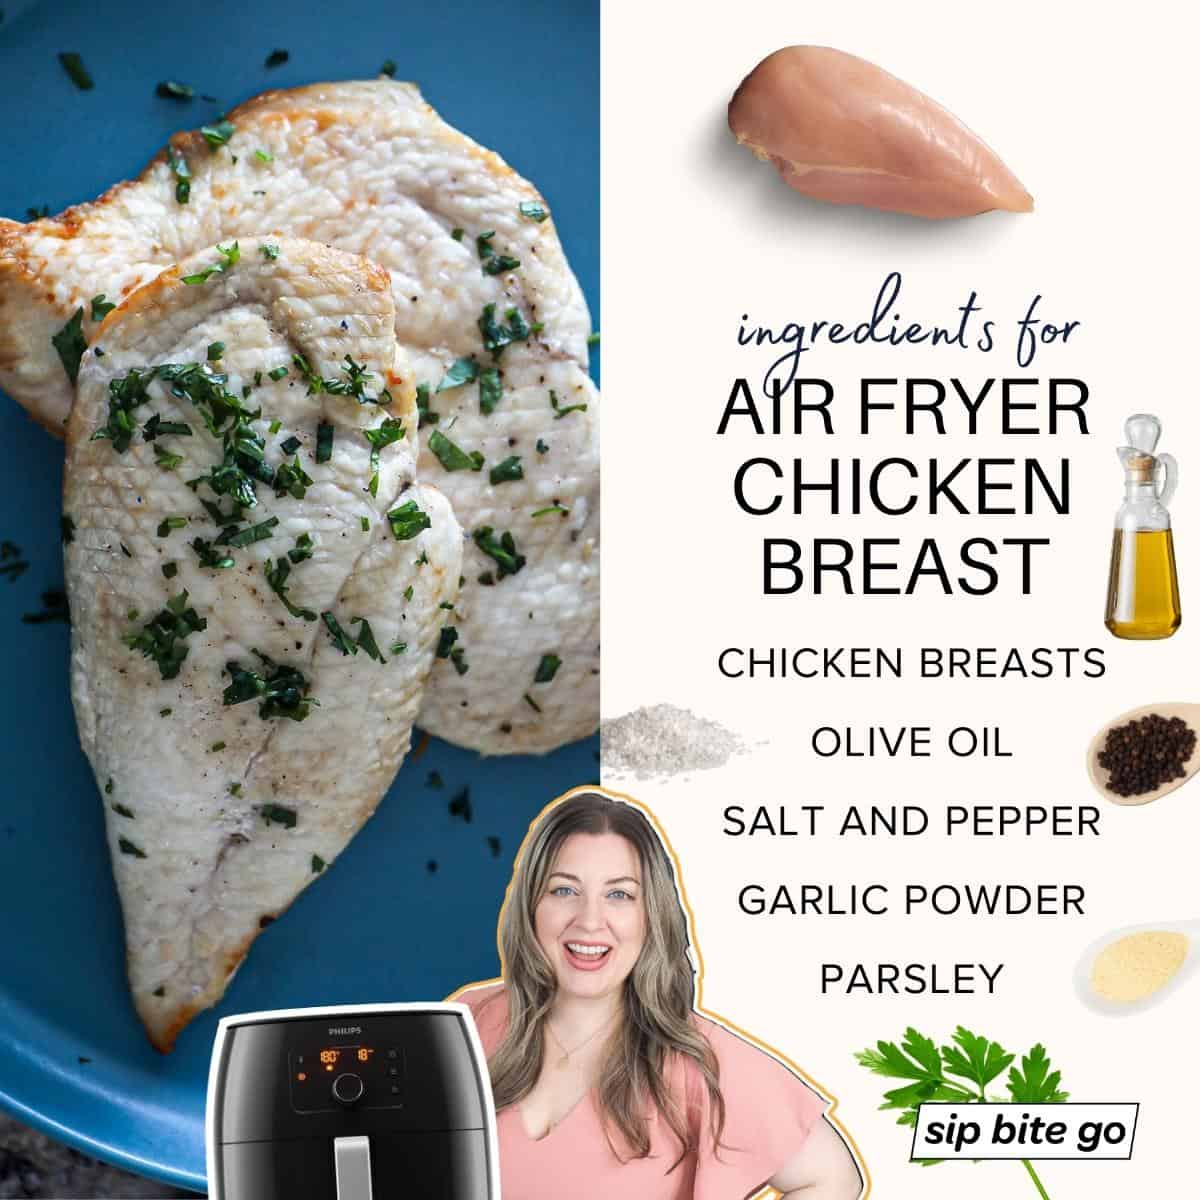 Infographic demonstrating ingredients for cooking chicken breast in air fryer machine from fresh or frozen